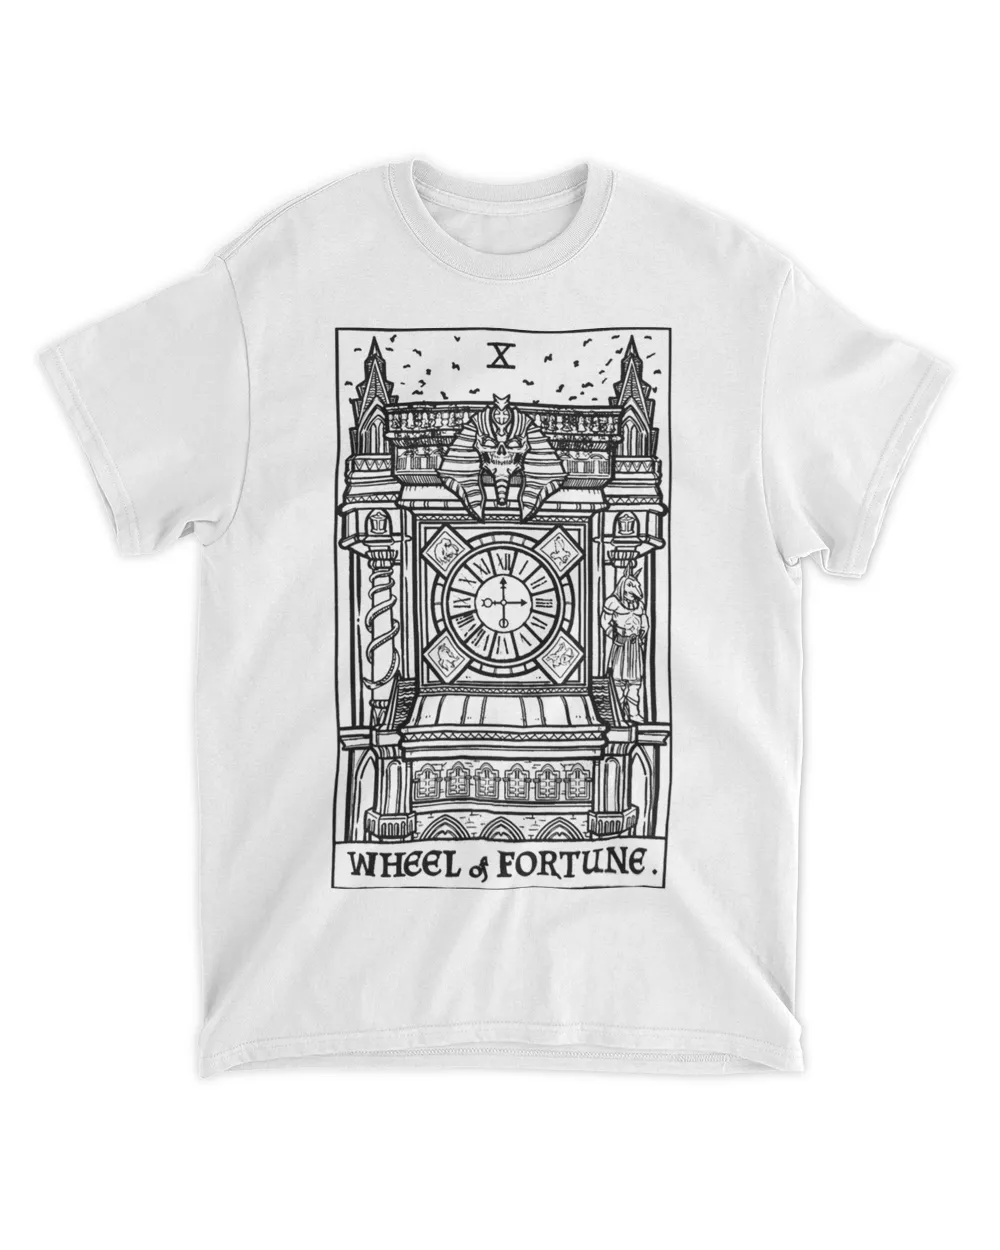 Wheel of Fortune Tarot Card Gothic Clock Tower